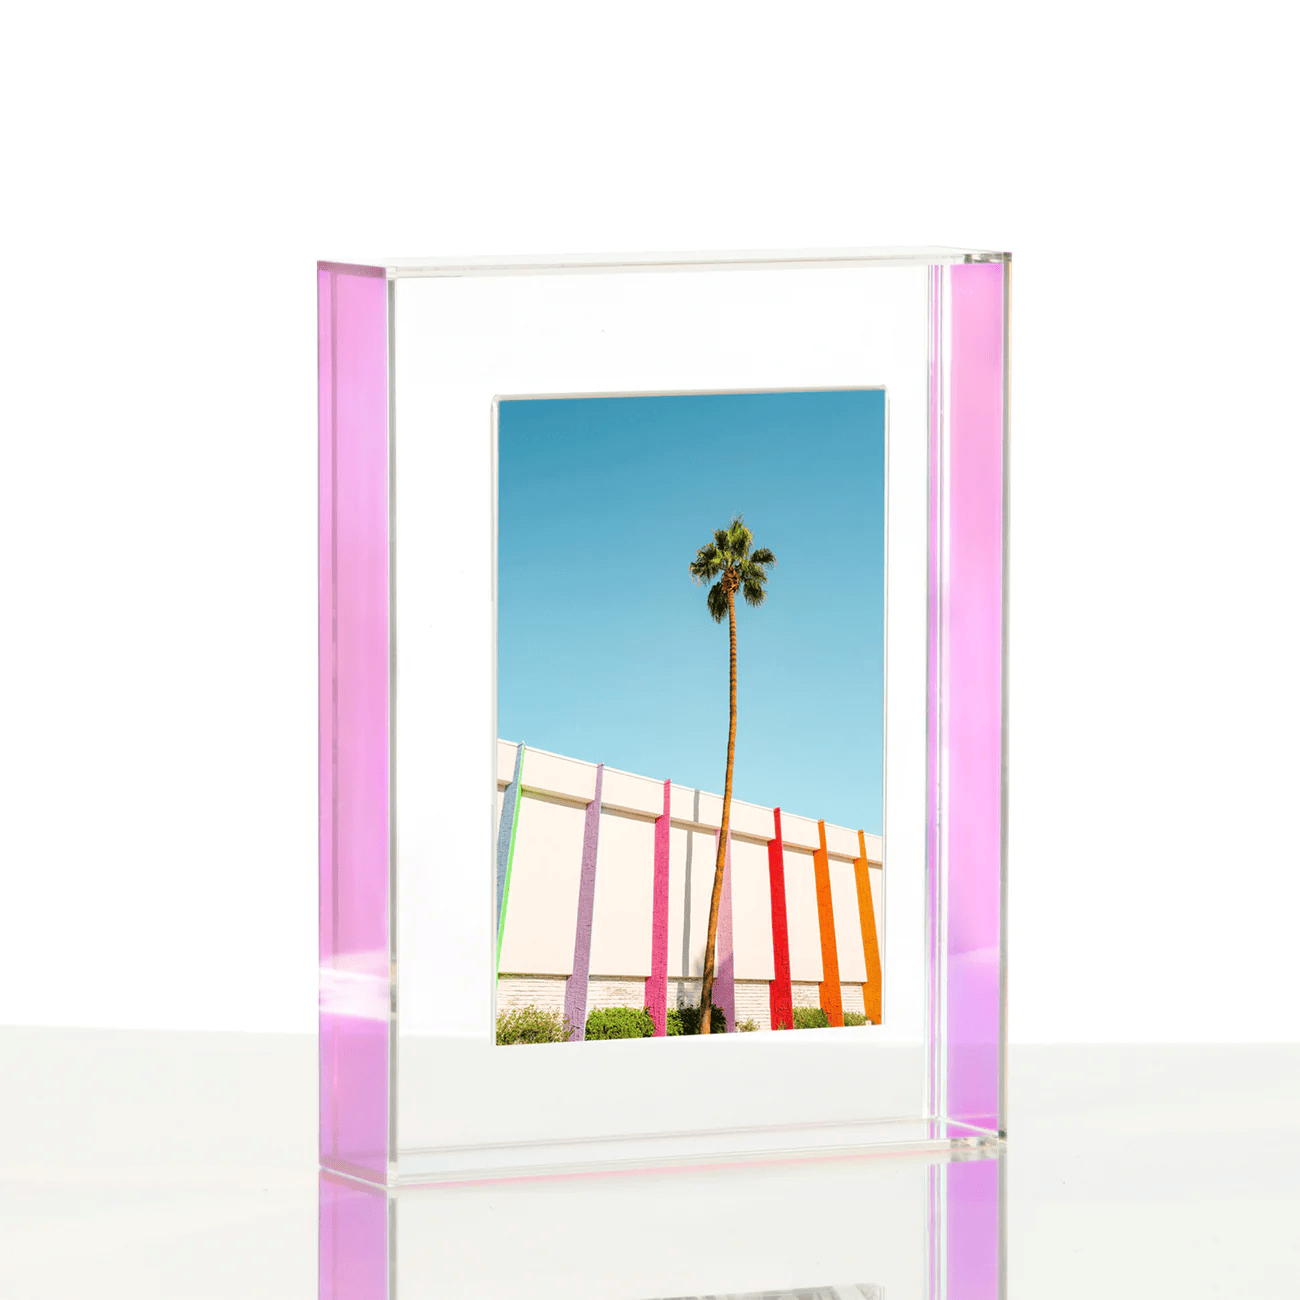 A close up image of a clear block frame standing on a desk with a landscape photo inside it